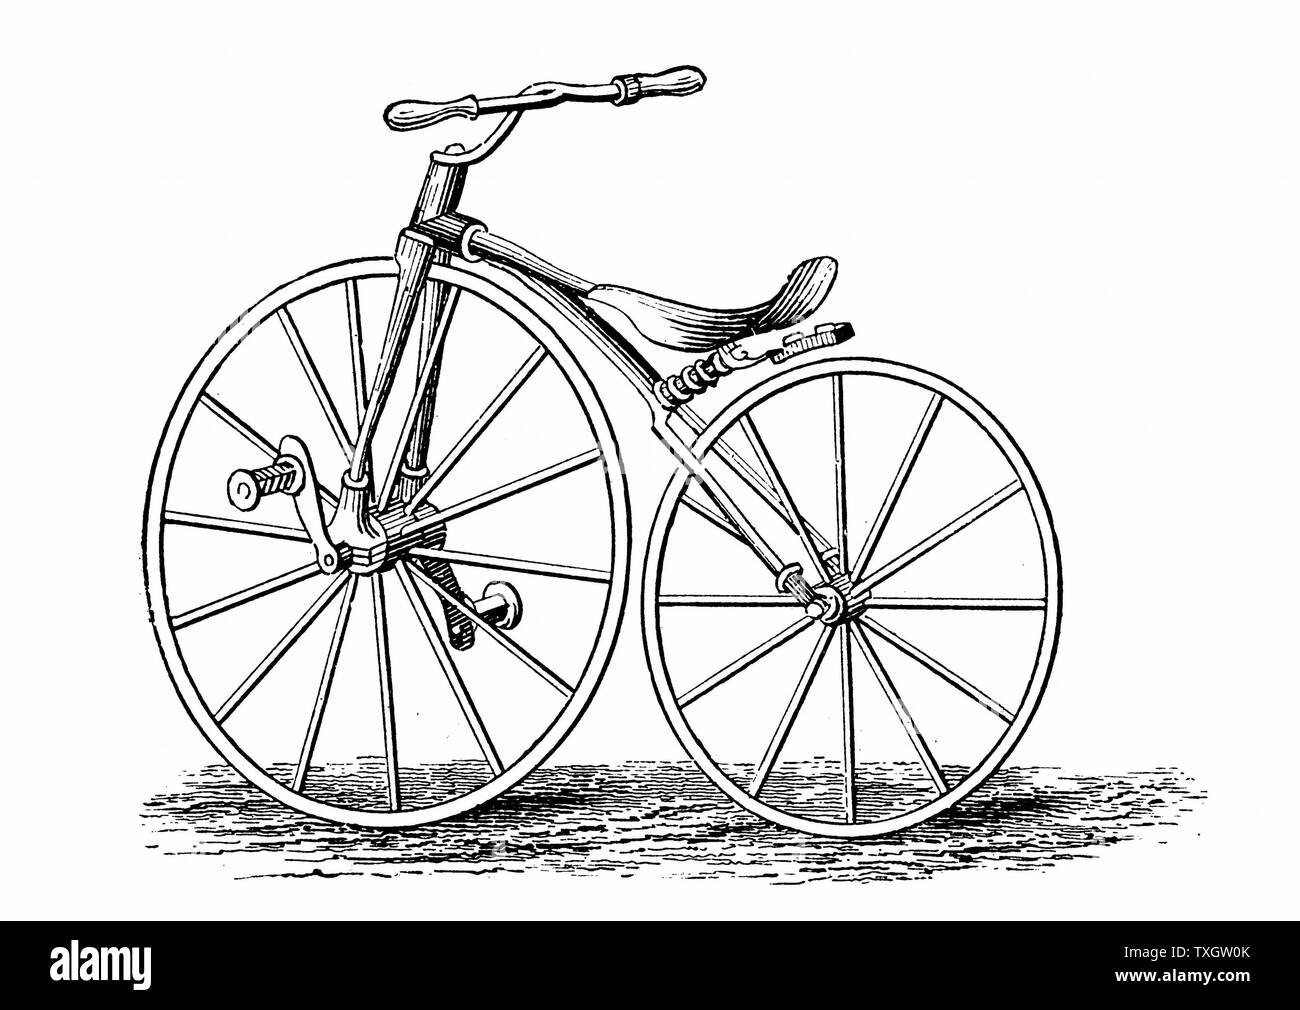 Pickering's crank-pedal driven bicycle, an American design c1880 Wood engraving Stock Photo